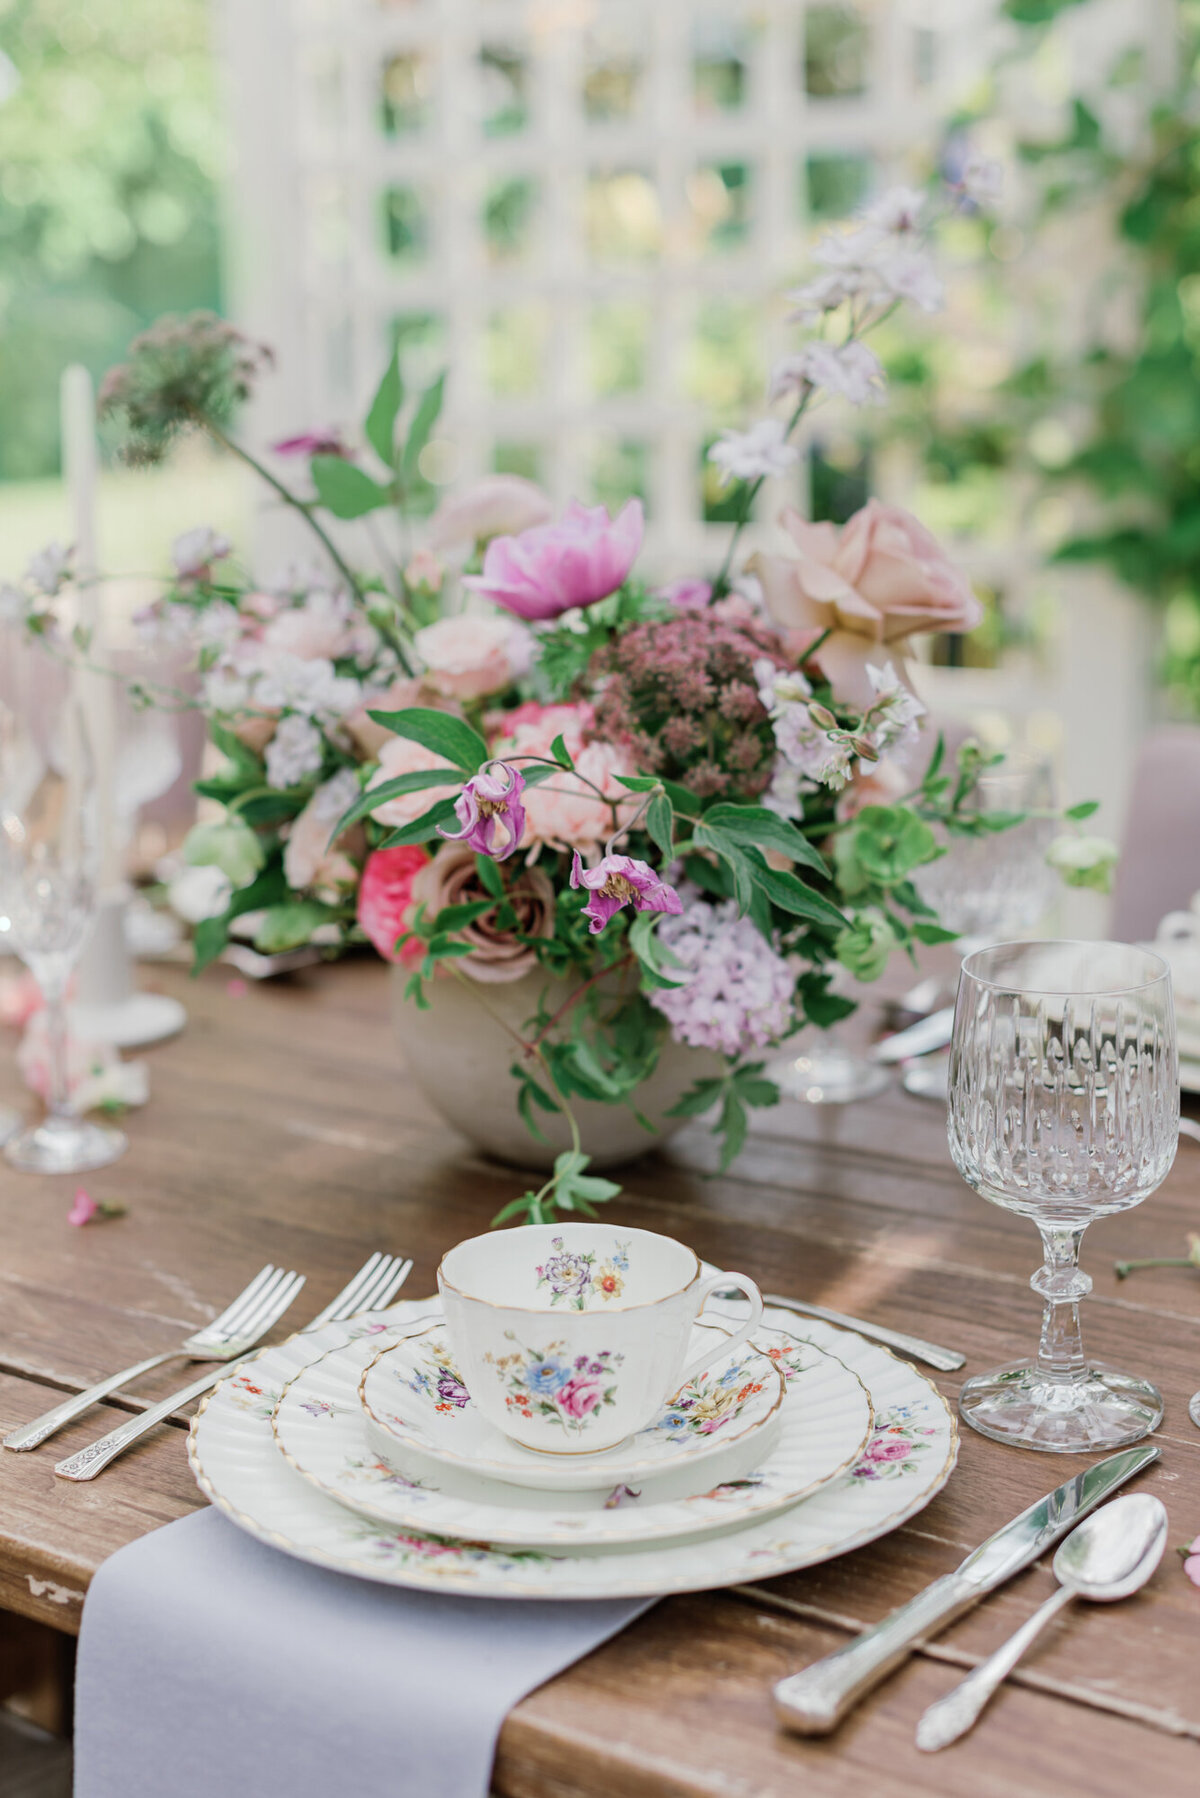 Rebekah Brontë Designs - High-End Wedding Designer. Curated & Meaningful Wedding Design & Management. Modern Fine Art Calgary Wedding Design at The Deane House, florals by Flower Artistry, photo by Kaity Body Photography